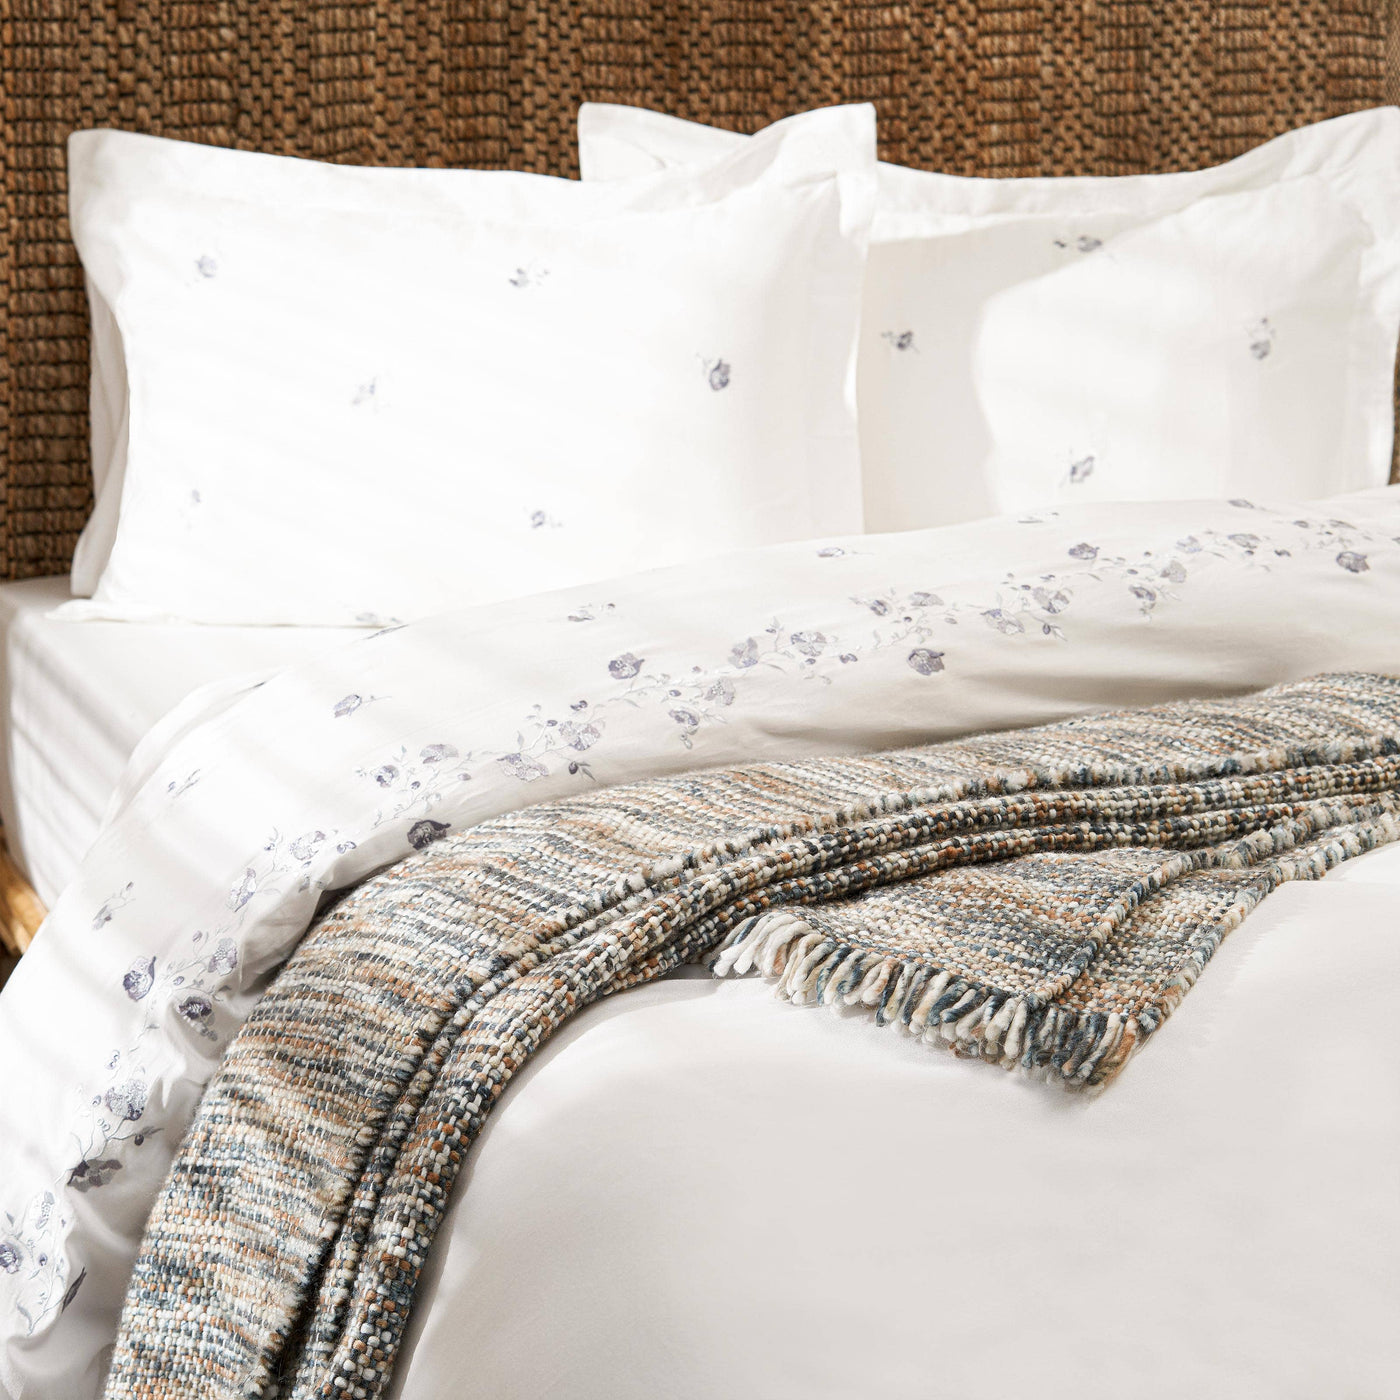 Elizabeth Flower Embroidered 100% Turkish Cotton 210 TC Duvet Cover + Fitted Sheet + 4 Pillowcases, White - Grey, Super King Size Bedding Sets sazy.com